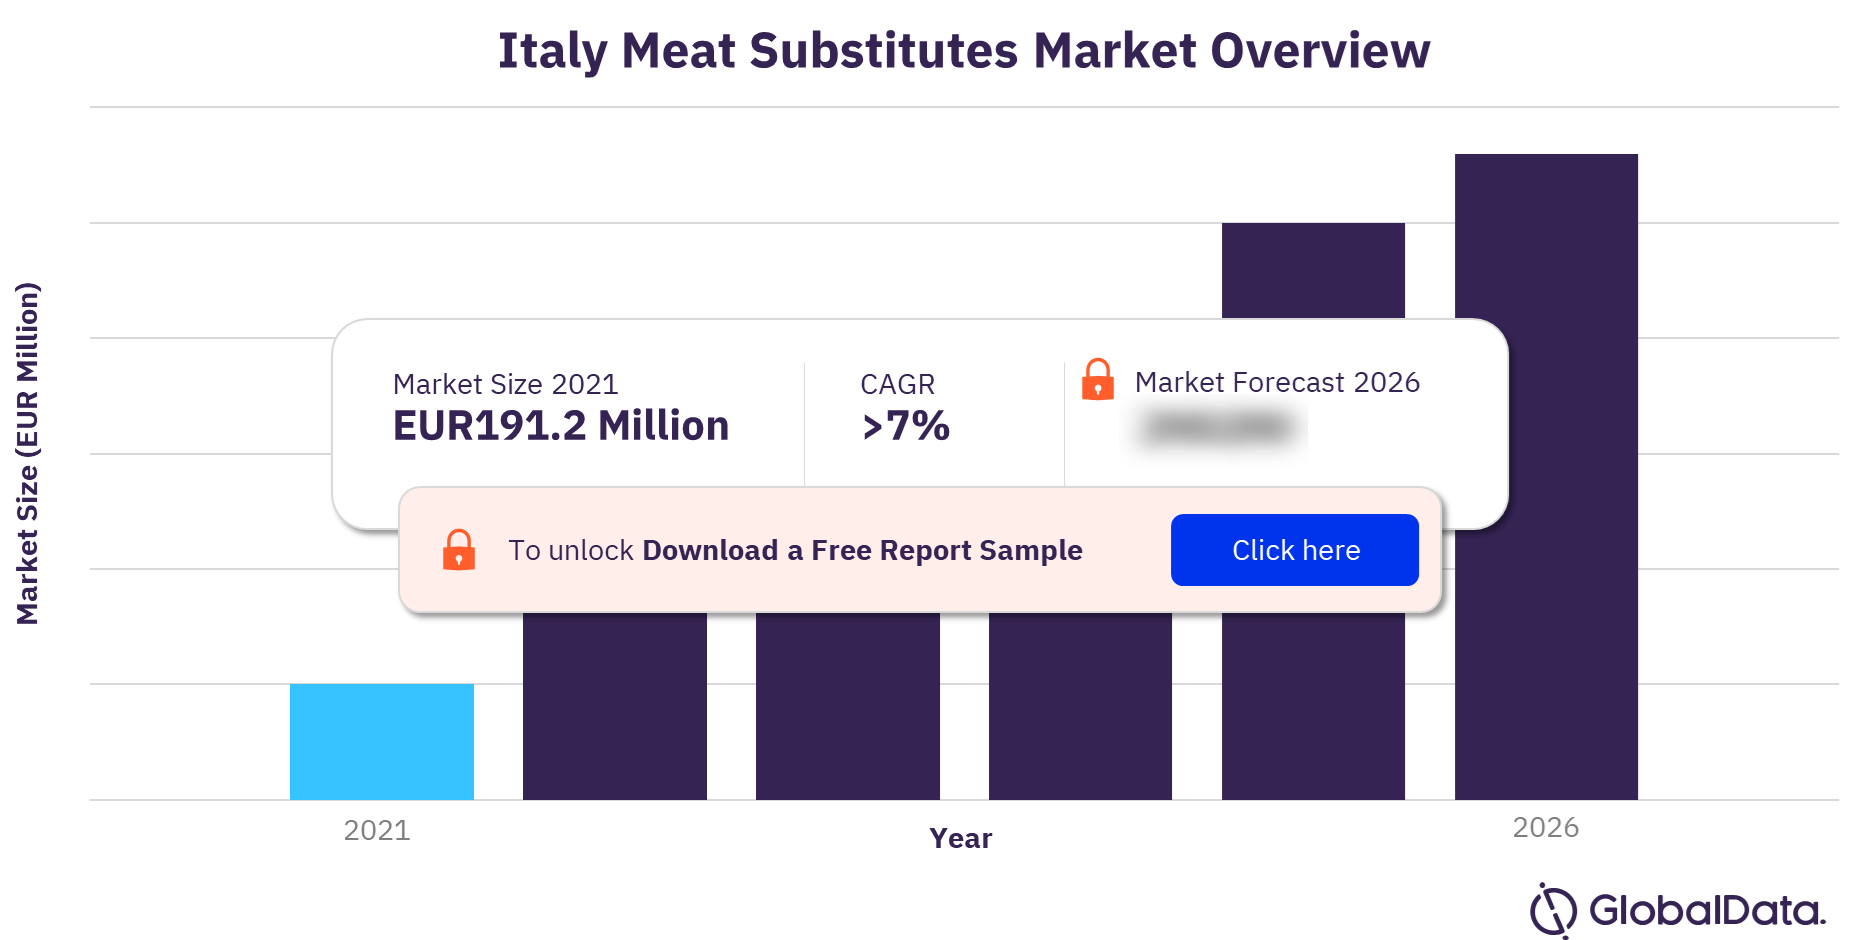 Italy Meat Substitutes Market Size 